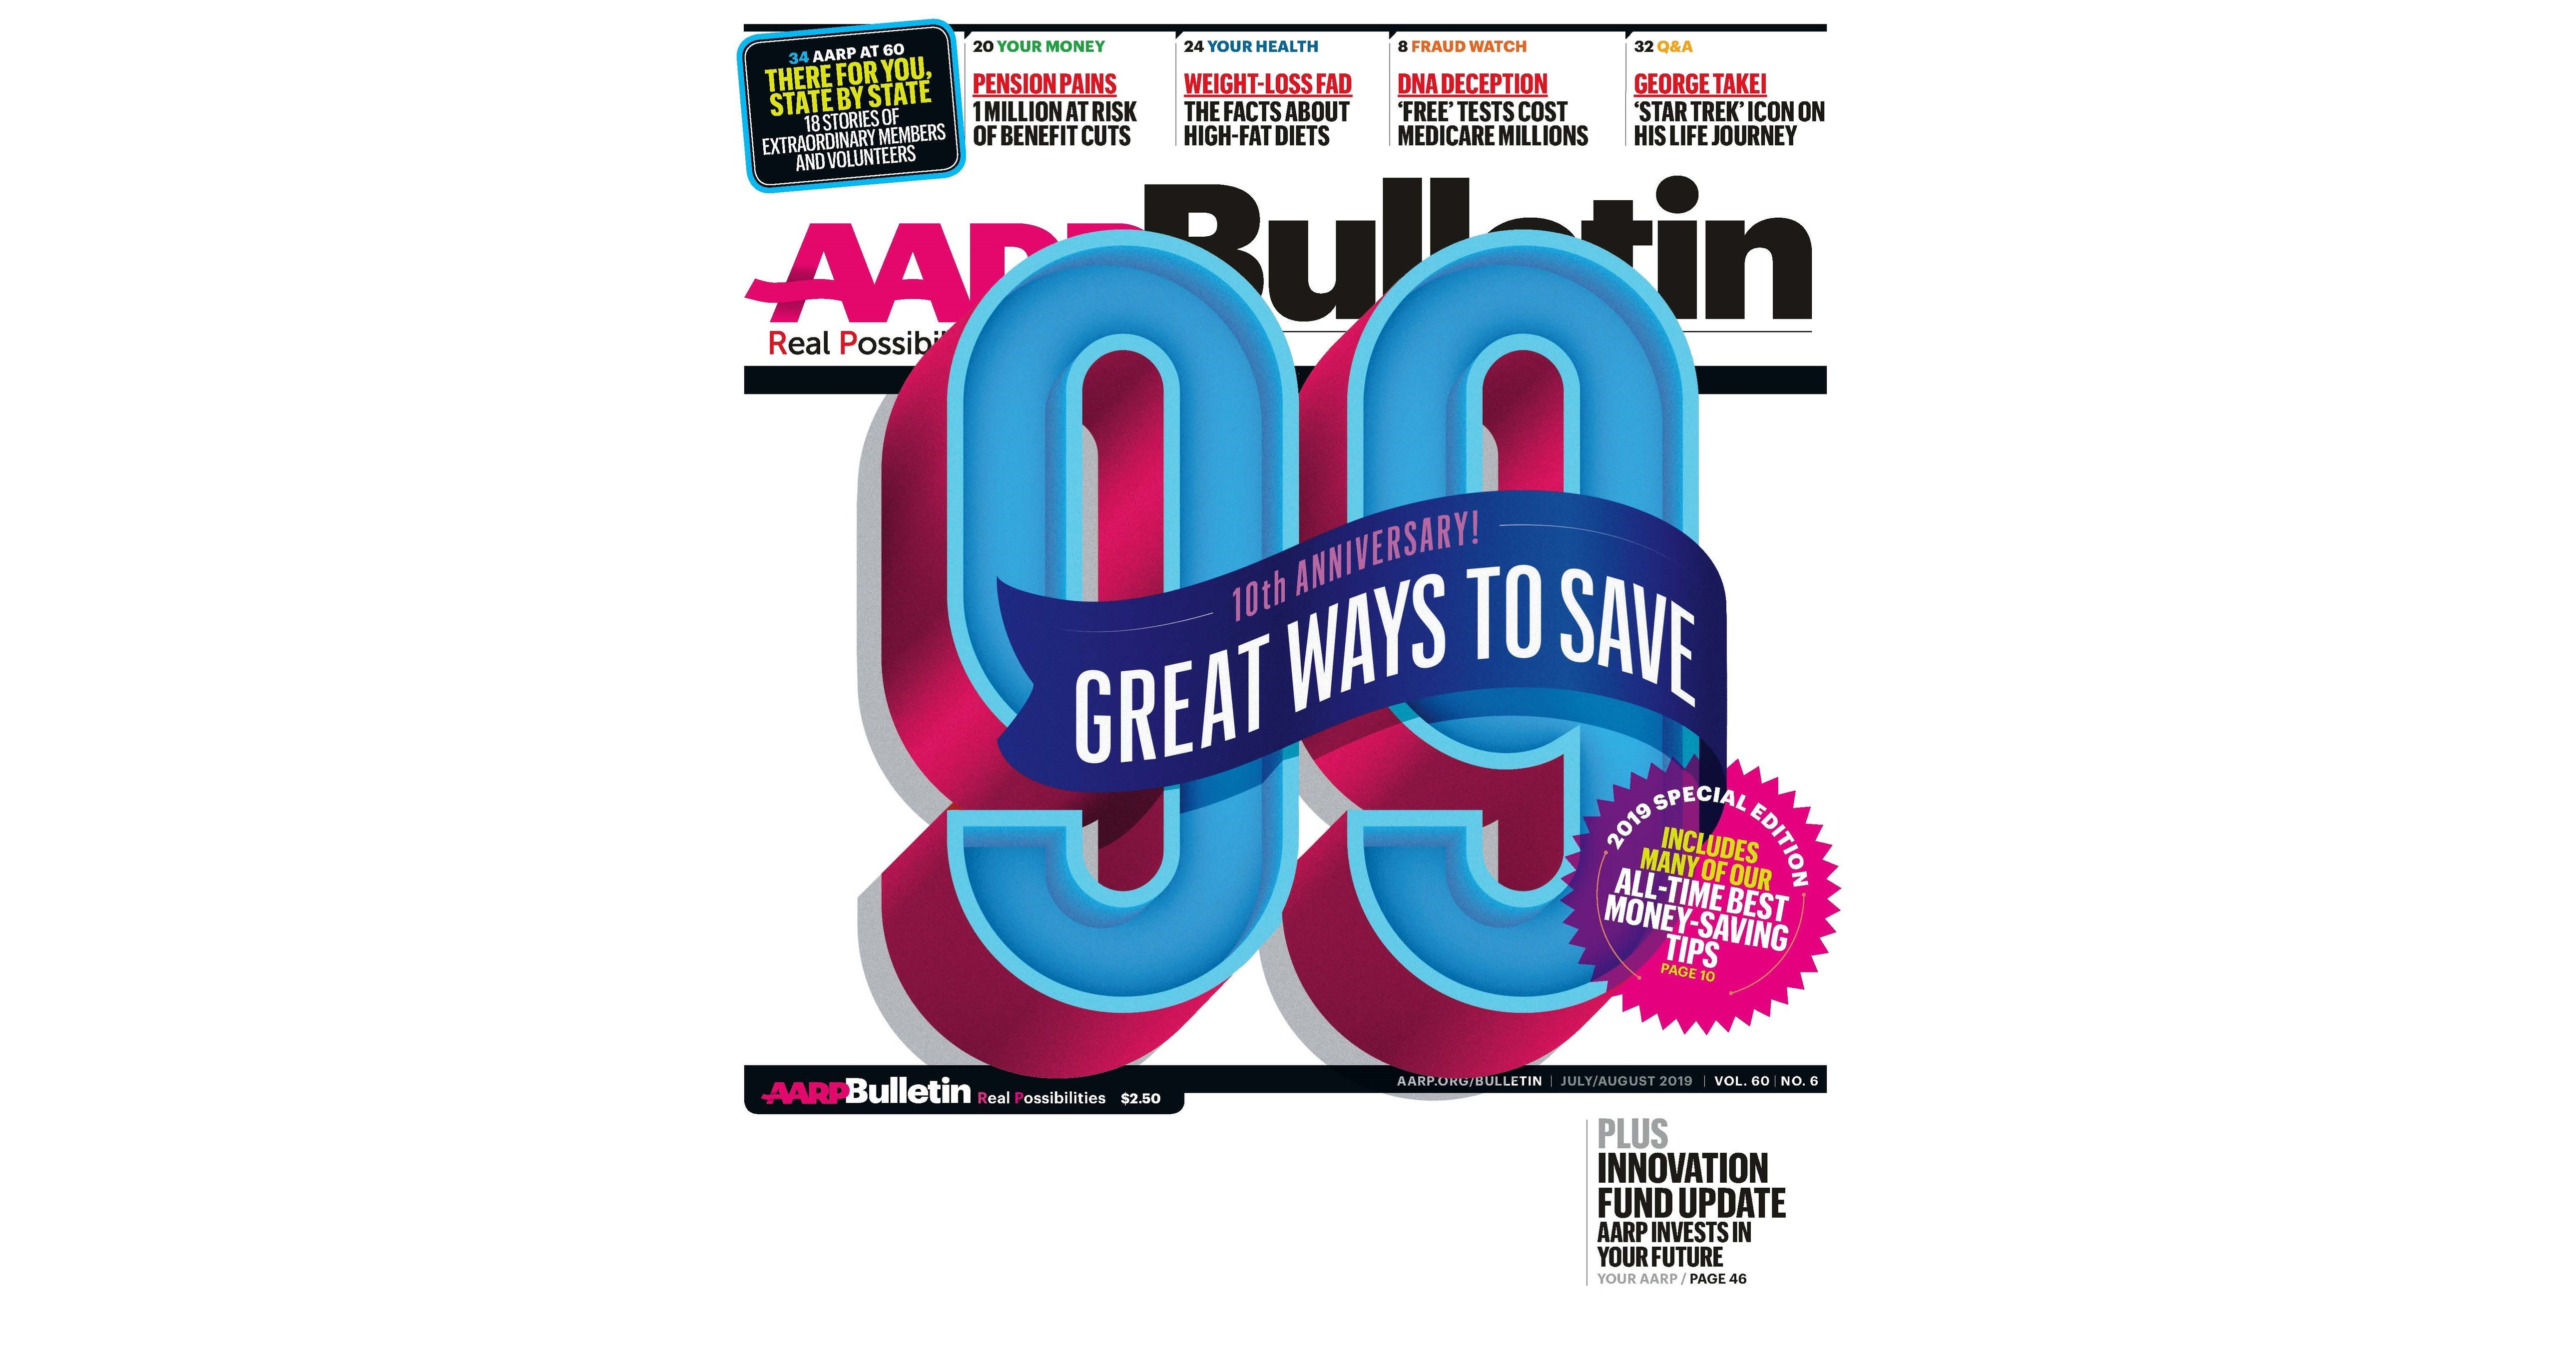 July/August AARP Bulletin Best of '99 Great Ways to Save'